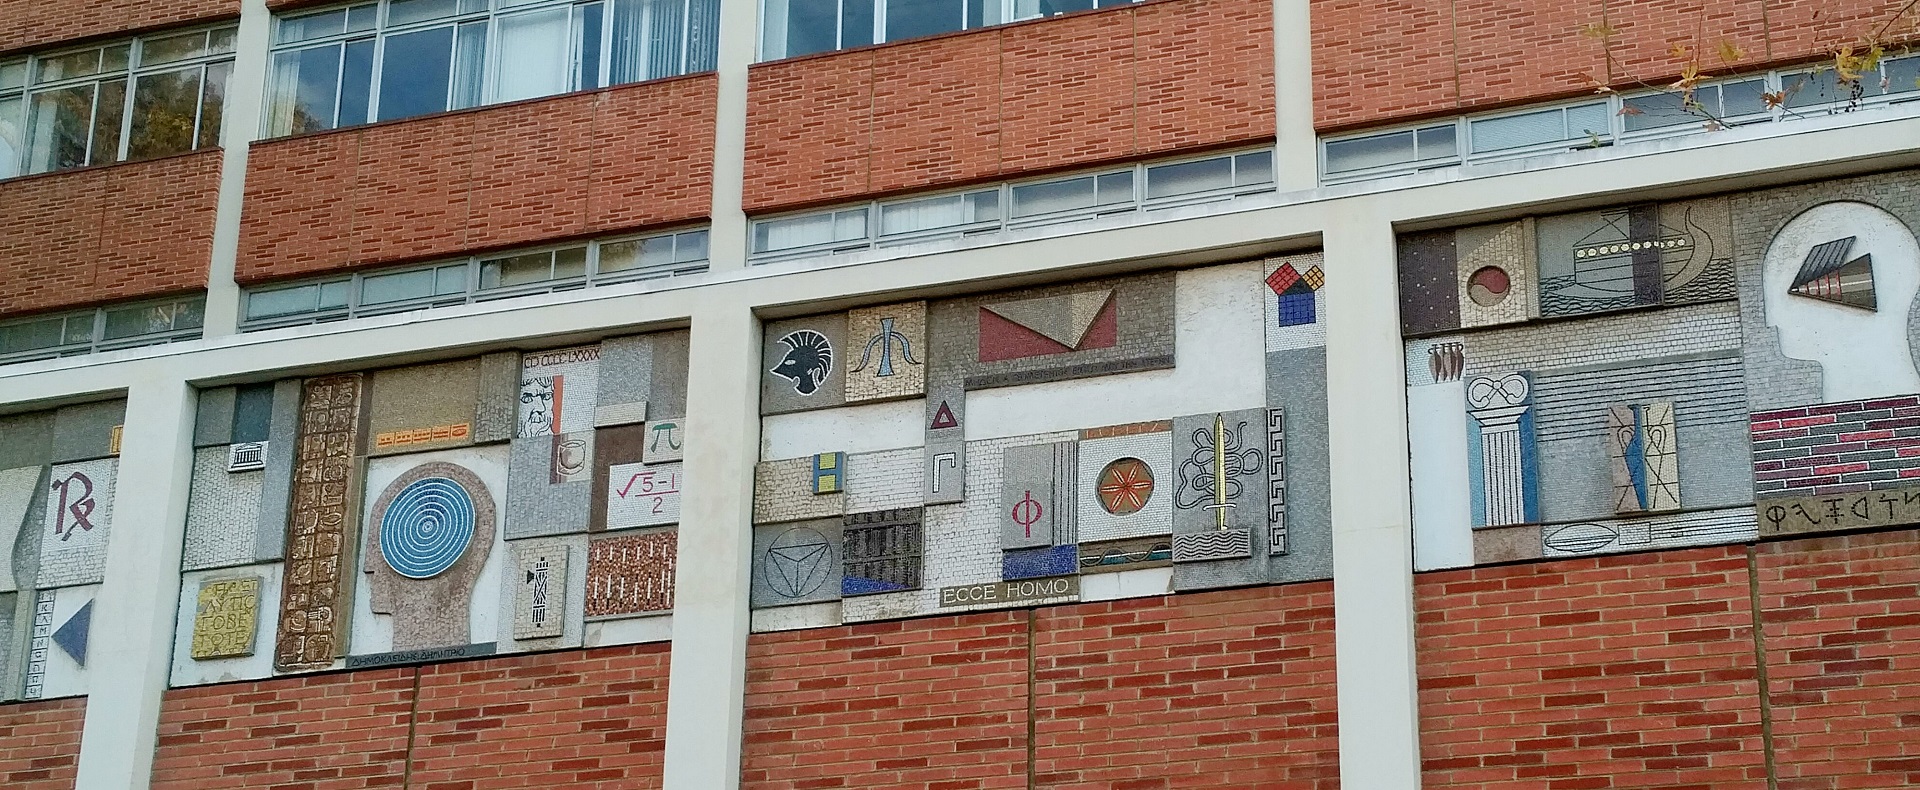 mosaic on the facade of a lecture hall